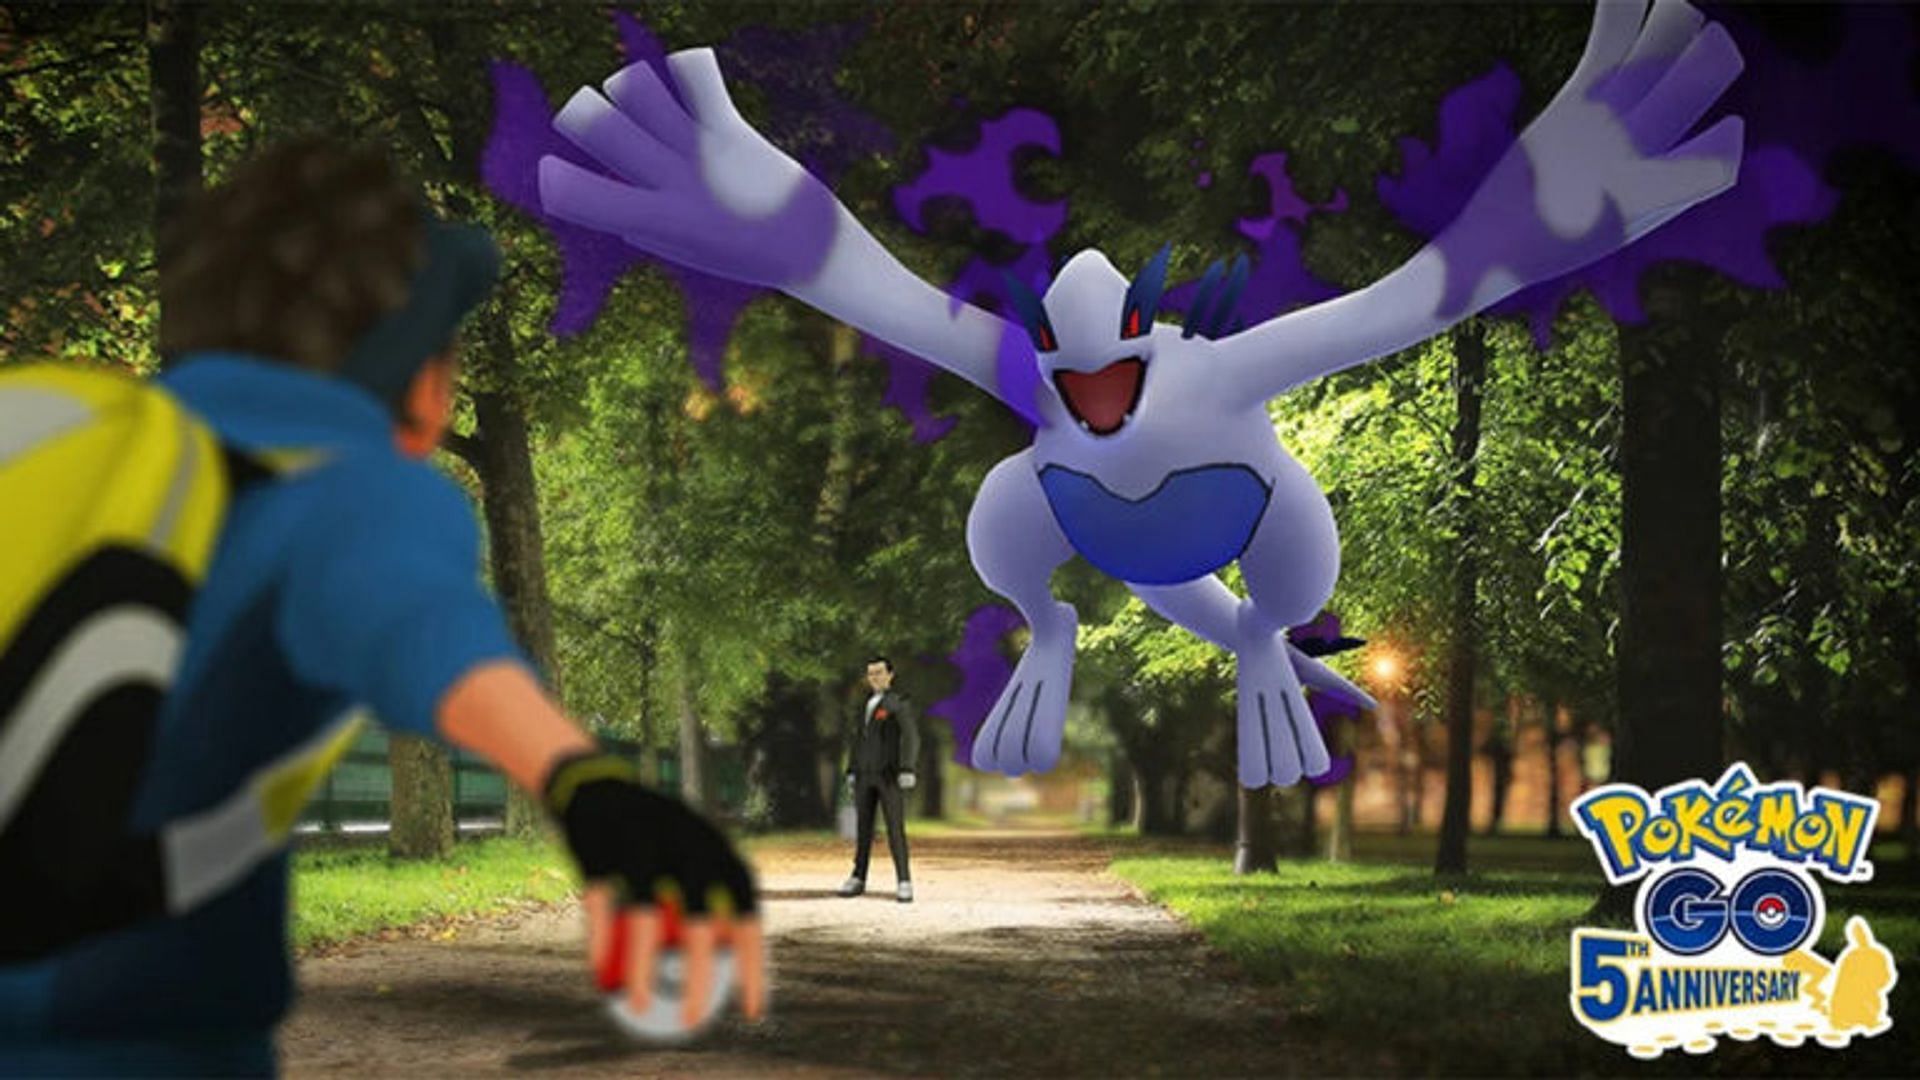 Shadow Lugia as it appears in Pokemon GO&#039;s promotional imagery (Image via Niantic)